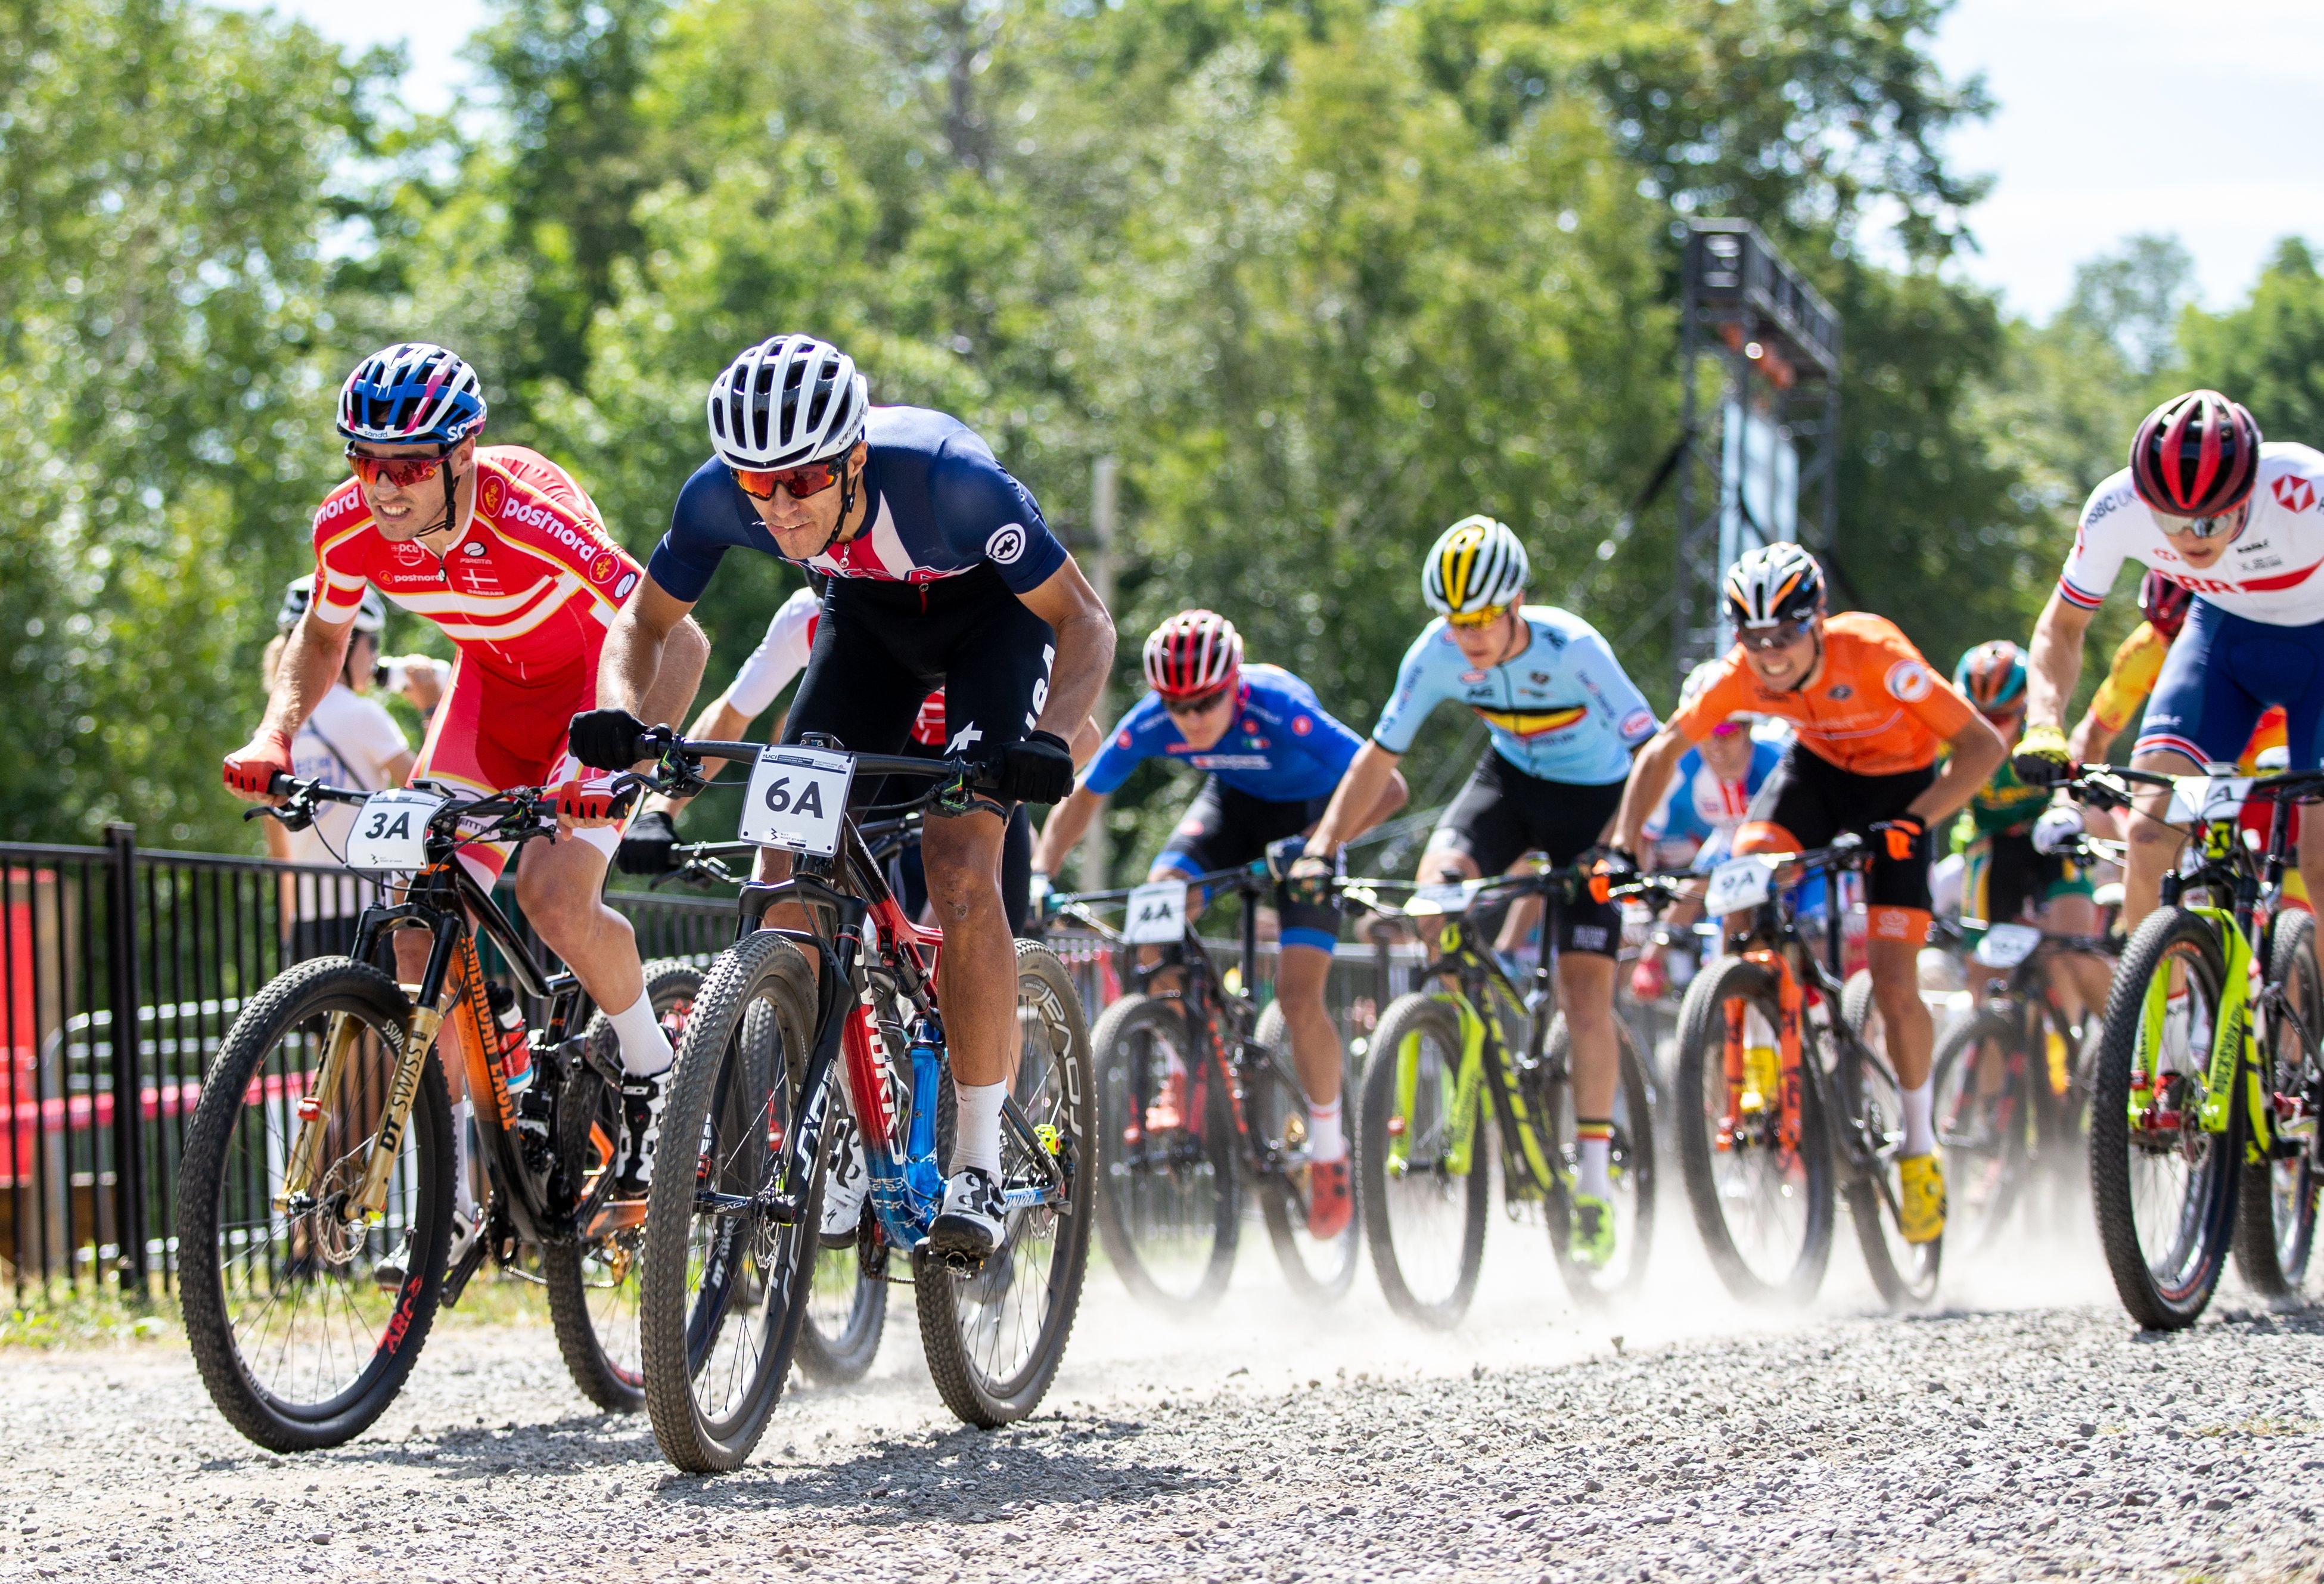 Christopher Blevins, center in navy, at the cross-country team relay at the UCI Mountain Bike World Championships in 2019. 